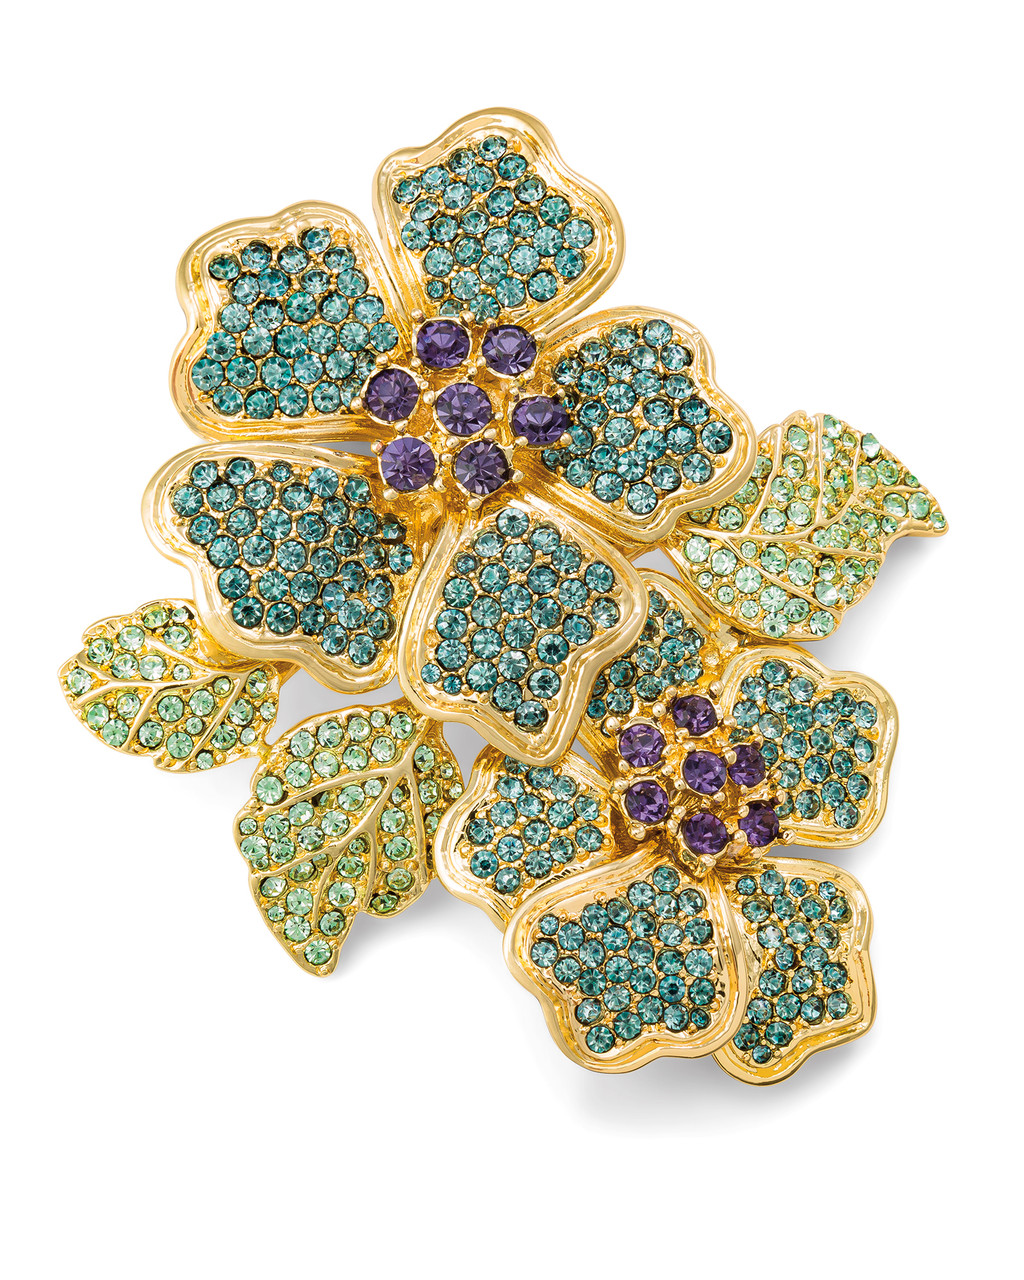 Smithsonian Store Double Flower Pin